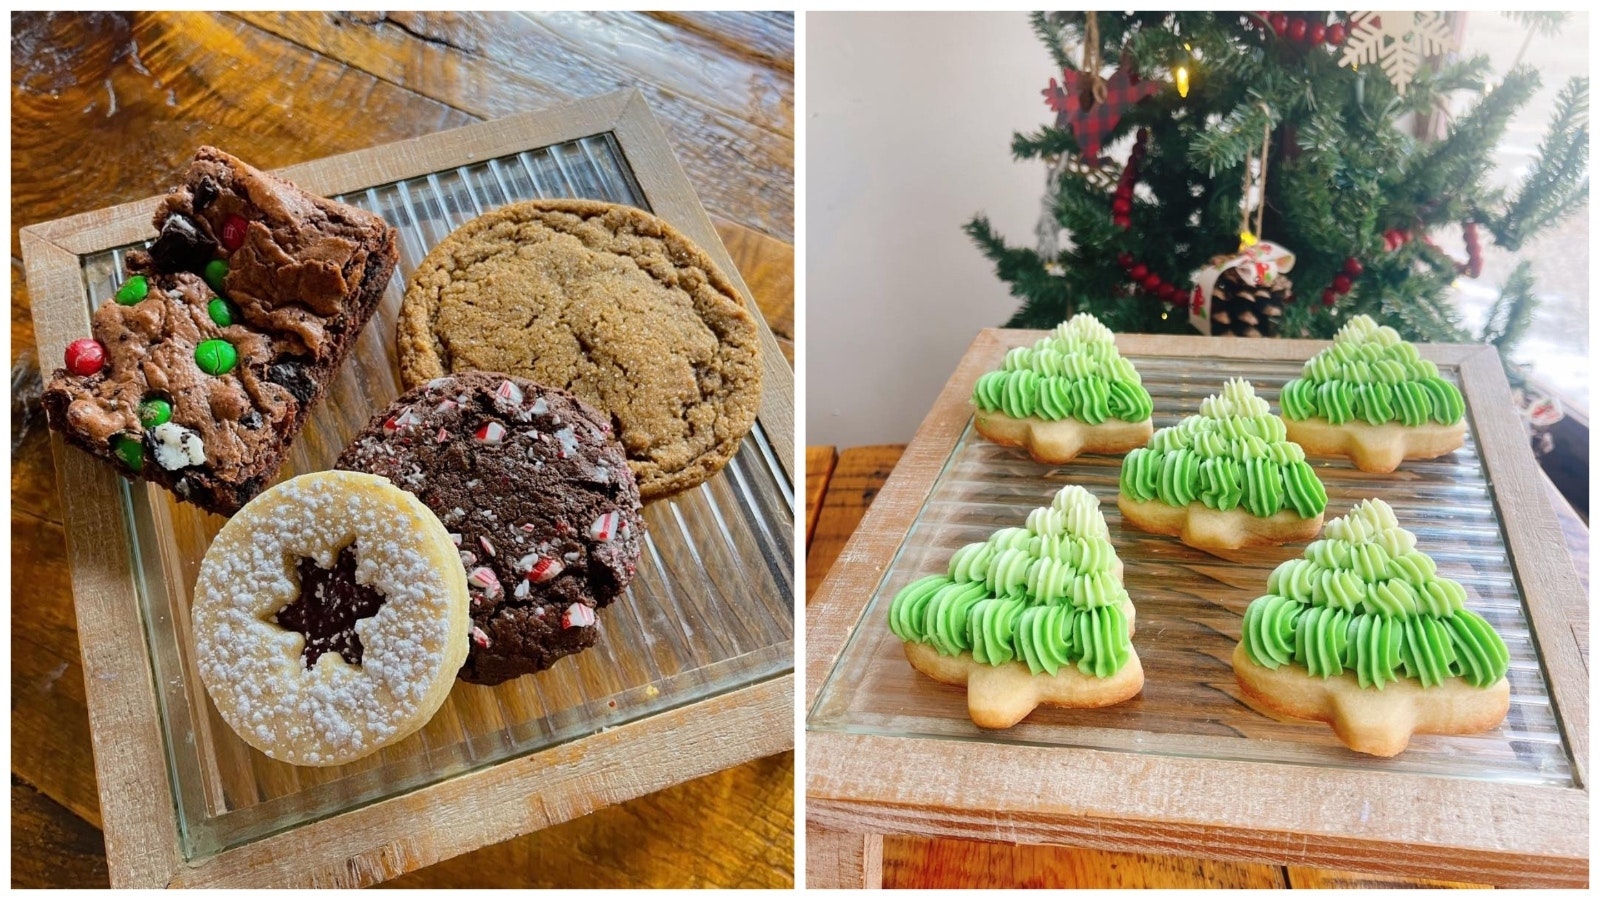 There are plenty of Christmas cookies this time of year.